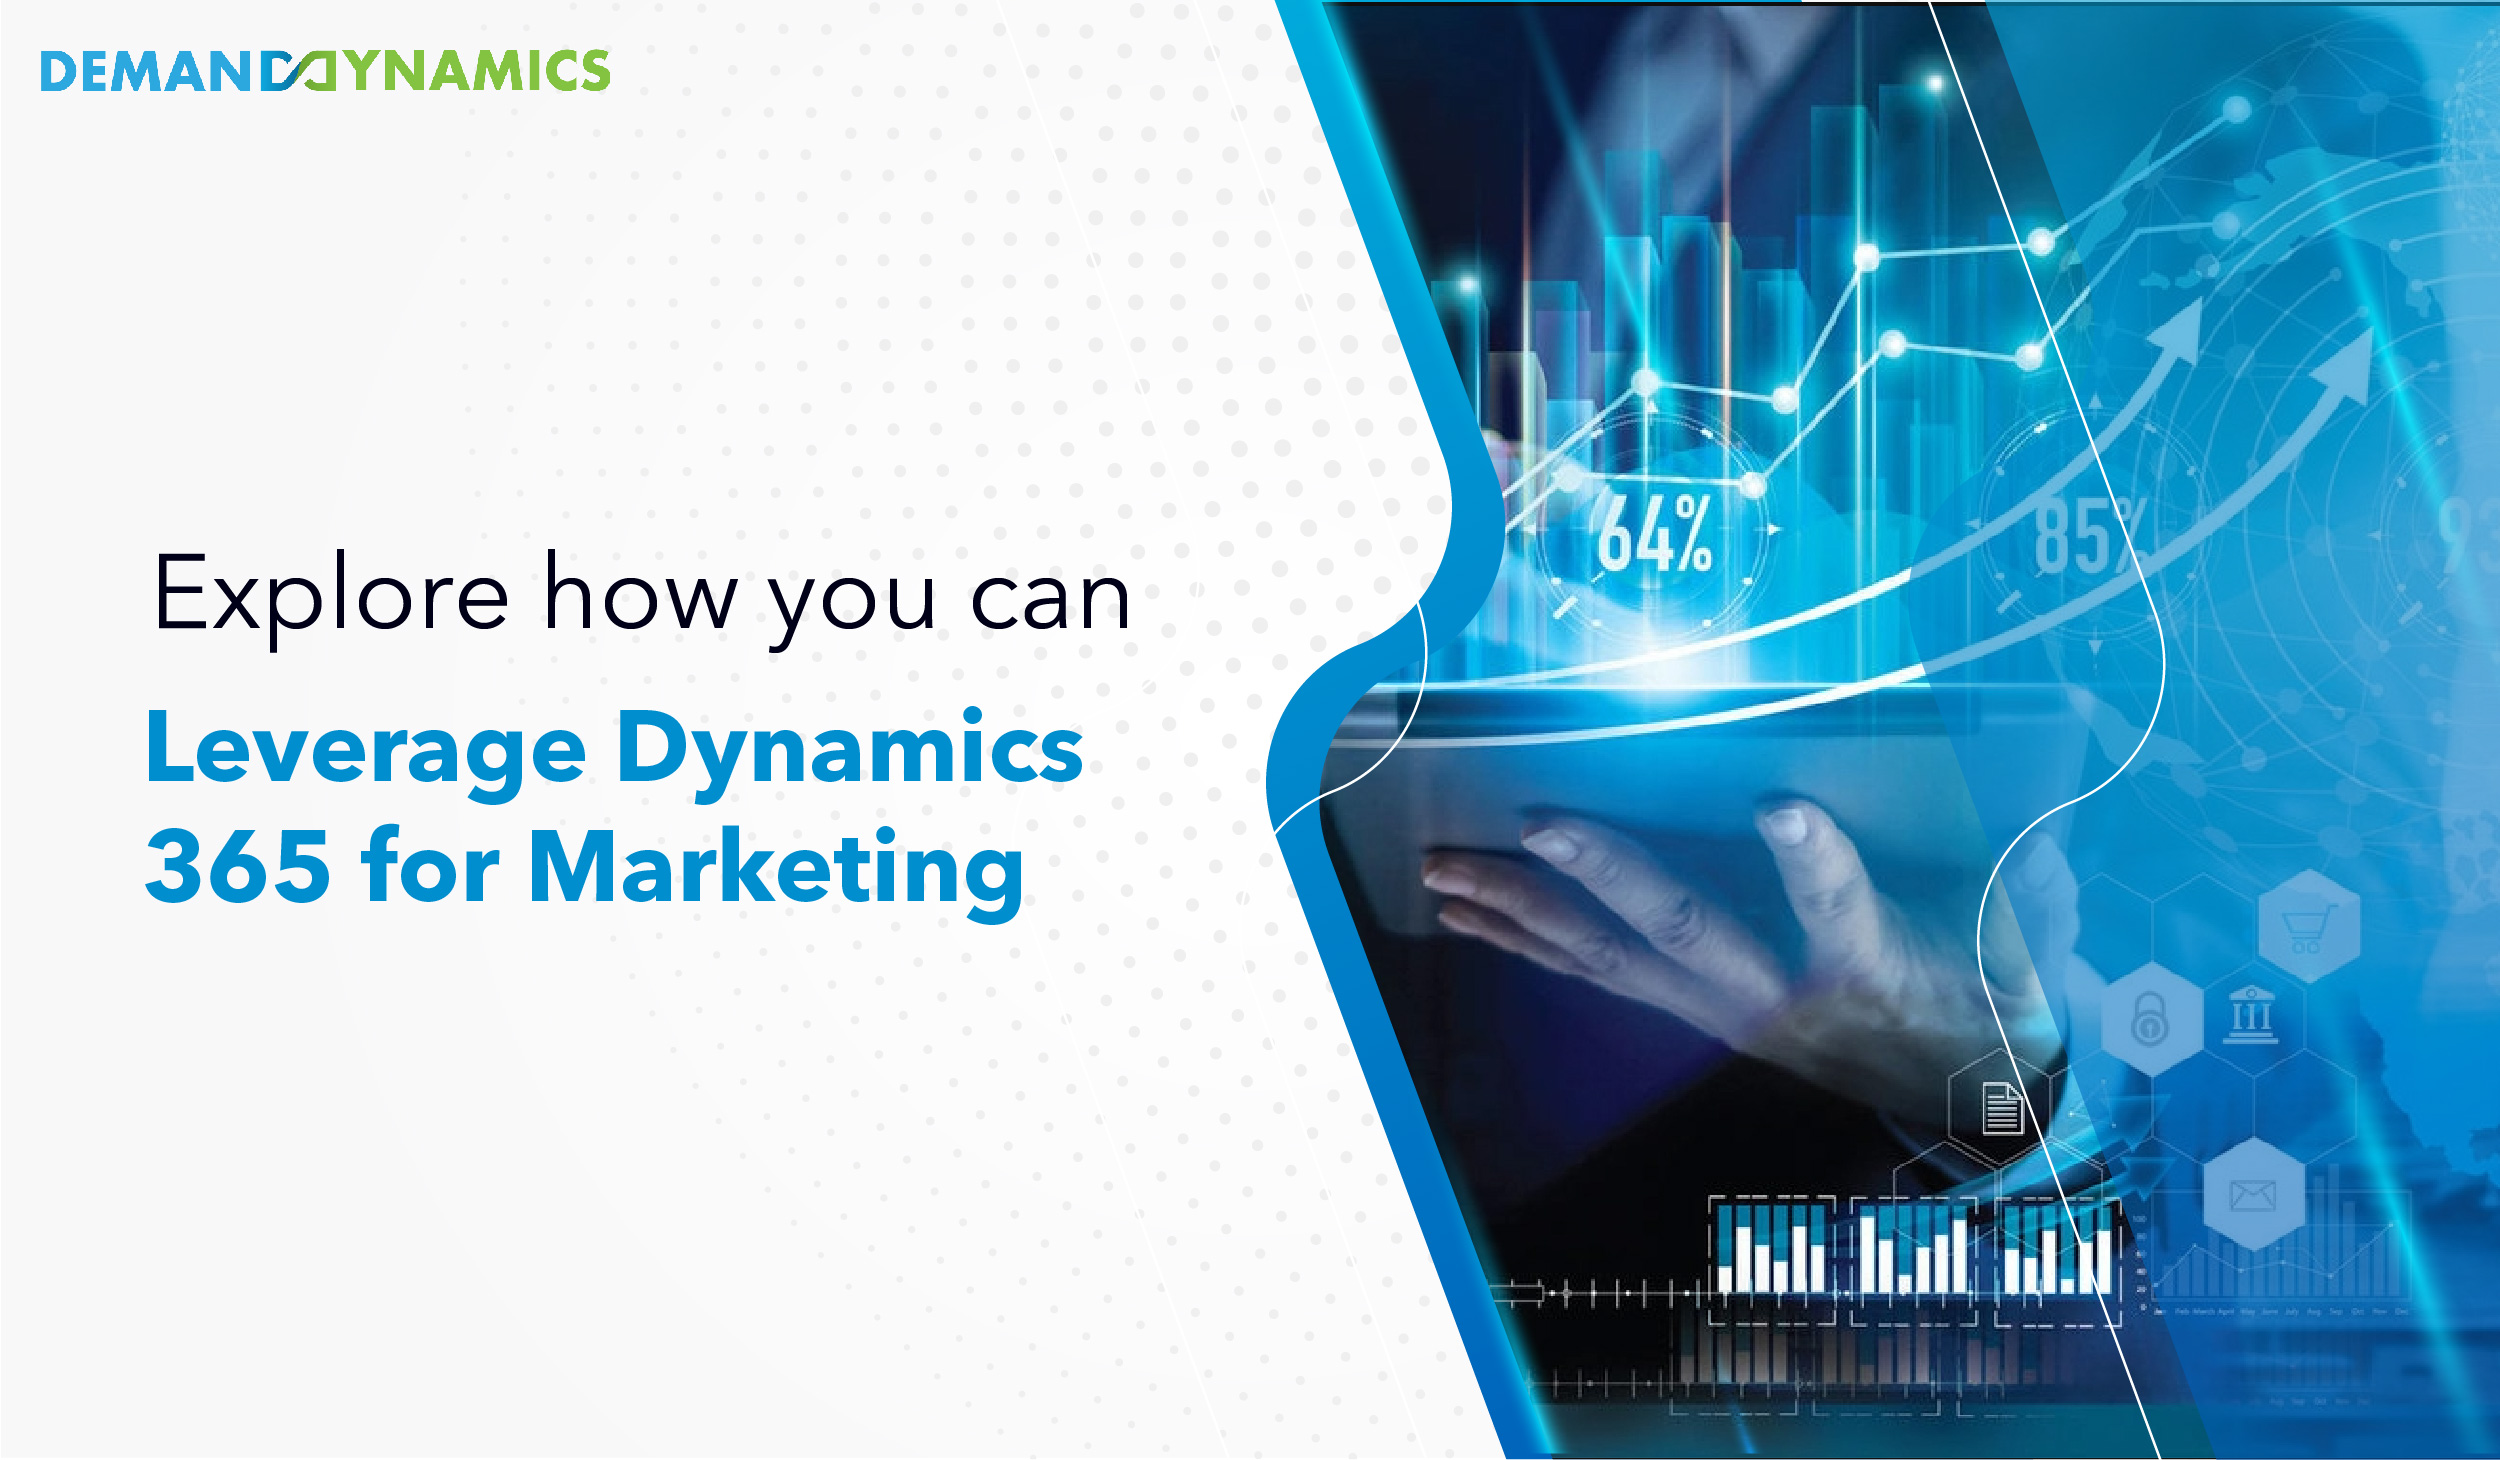 A Guide for Marketing Teams to Efficiently use Dynamics 365 CRM